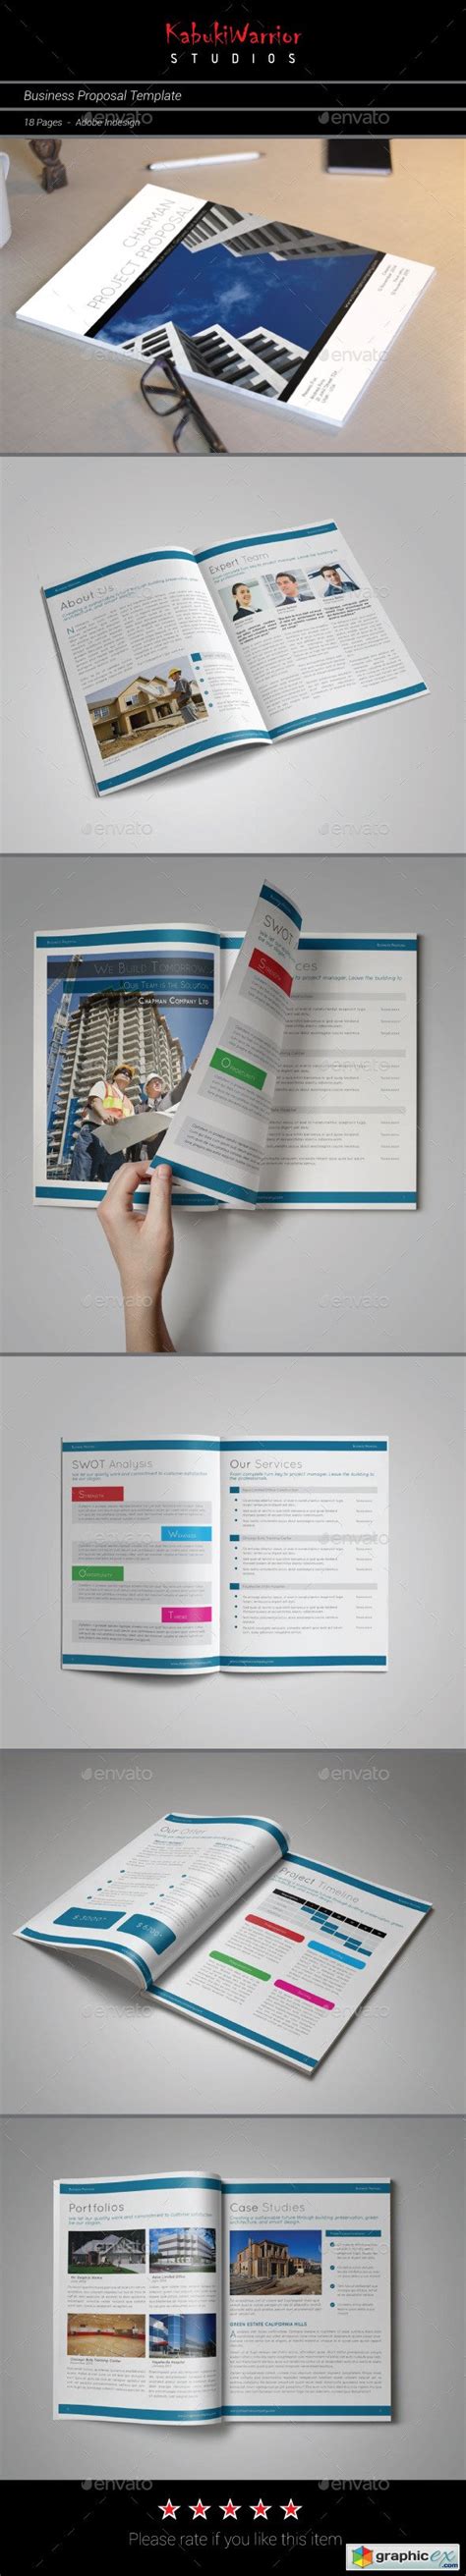 Business Proposal Template 10297126 » Free Download Vector Stock Image Photoshop Icon